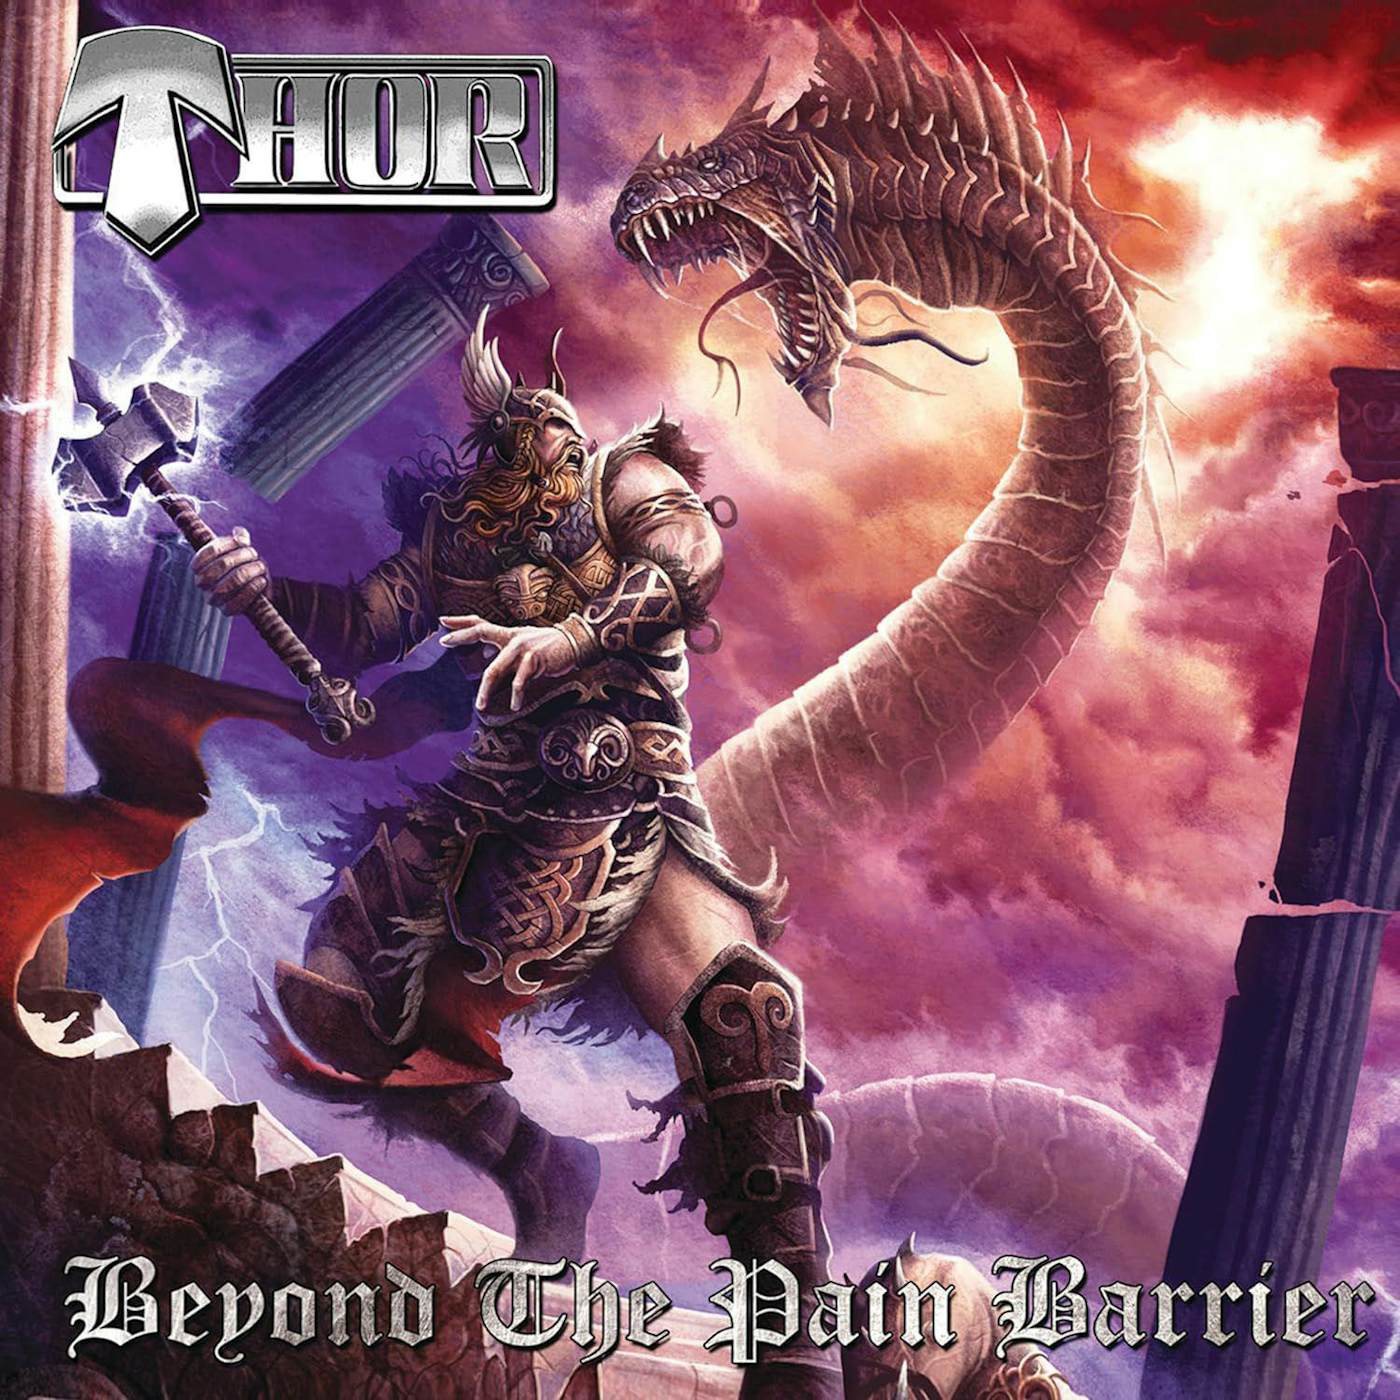 Thor Beyond The Pain Barrier (Reissue) Vinyl Record